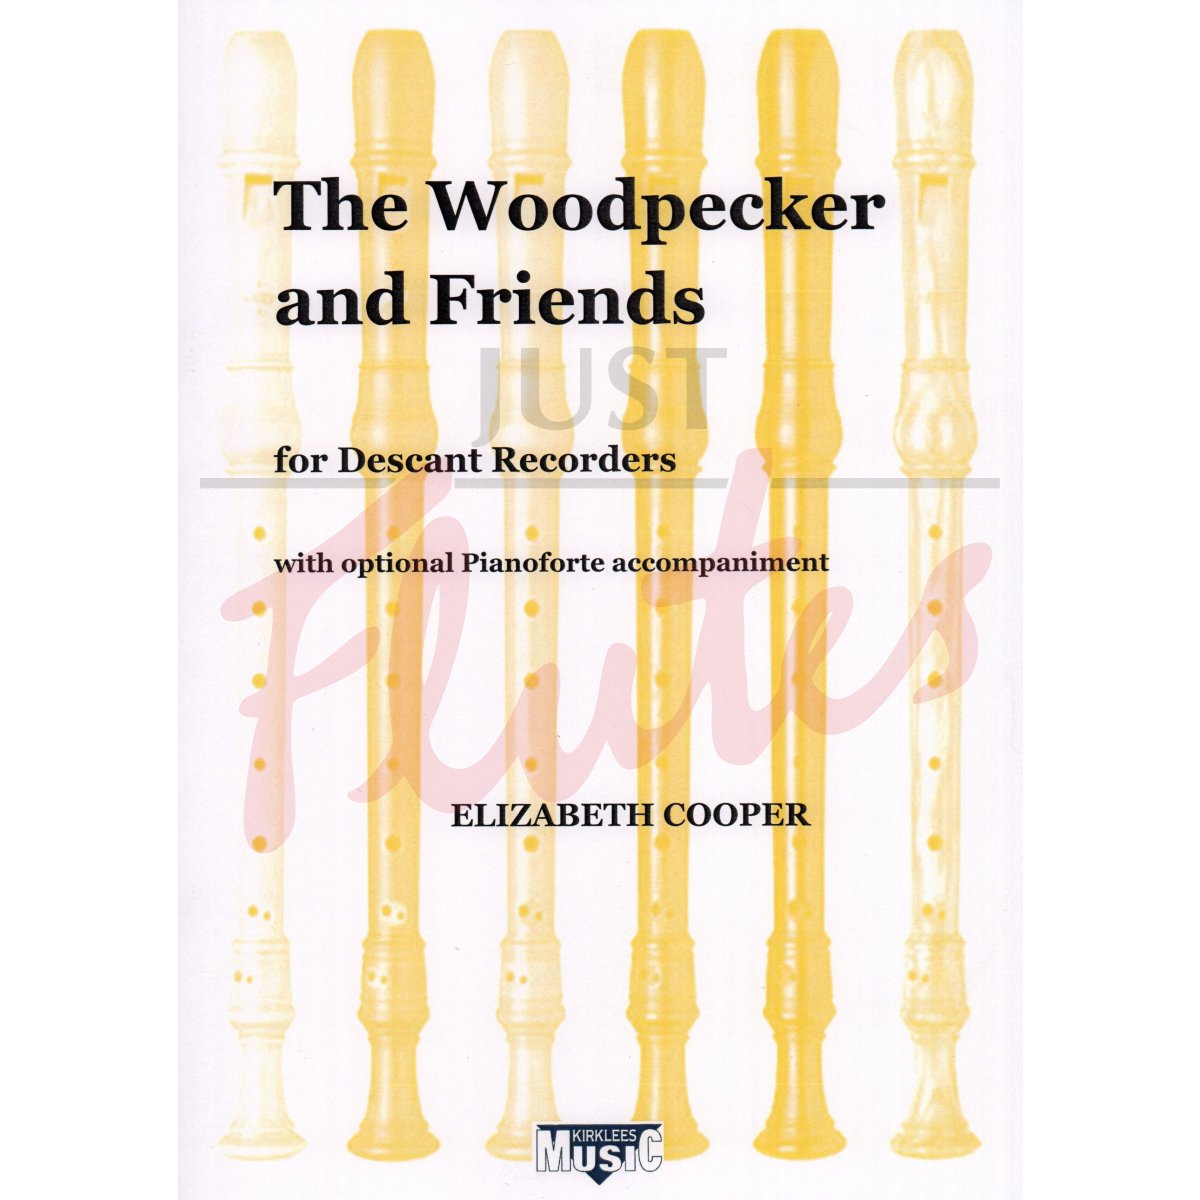 The Woodpecker and Friends for Descant Recorders and optional Piano Accompaniment